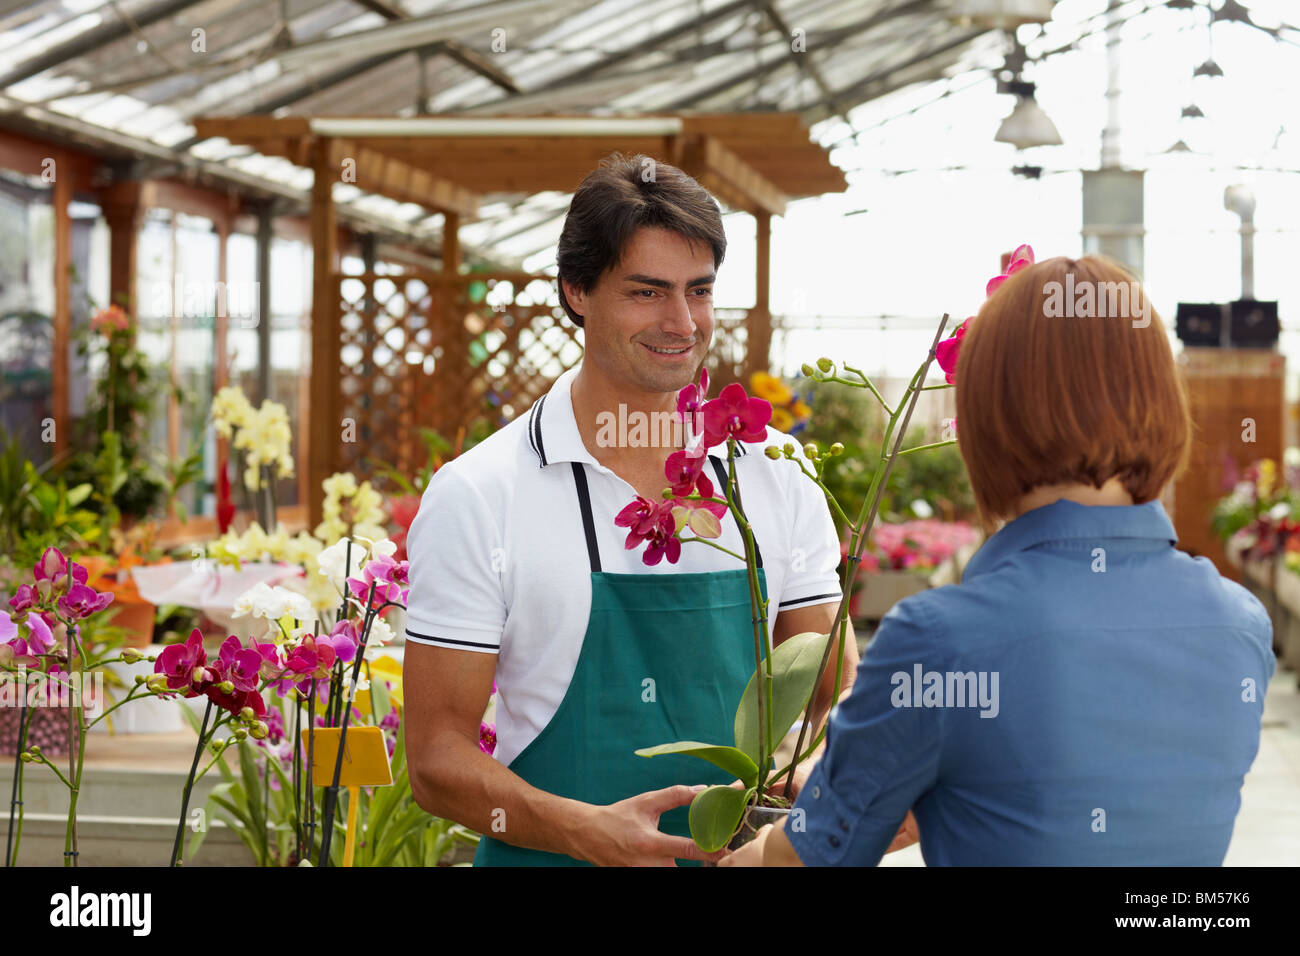 flower seller dealing with customer Stock Photo